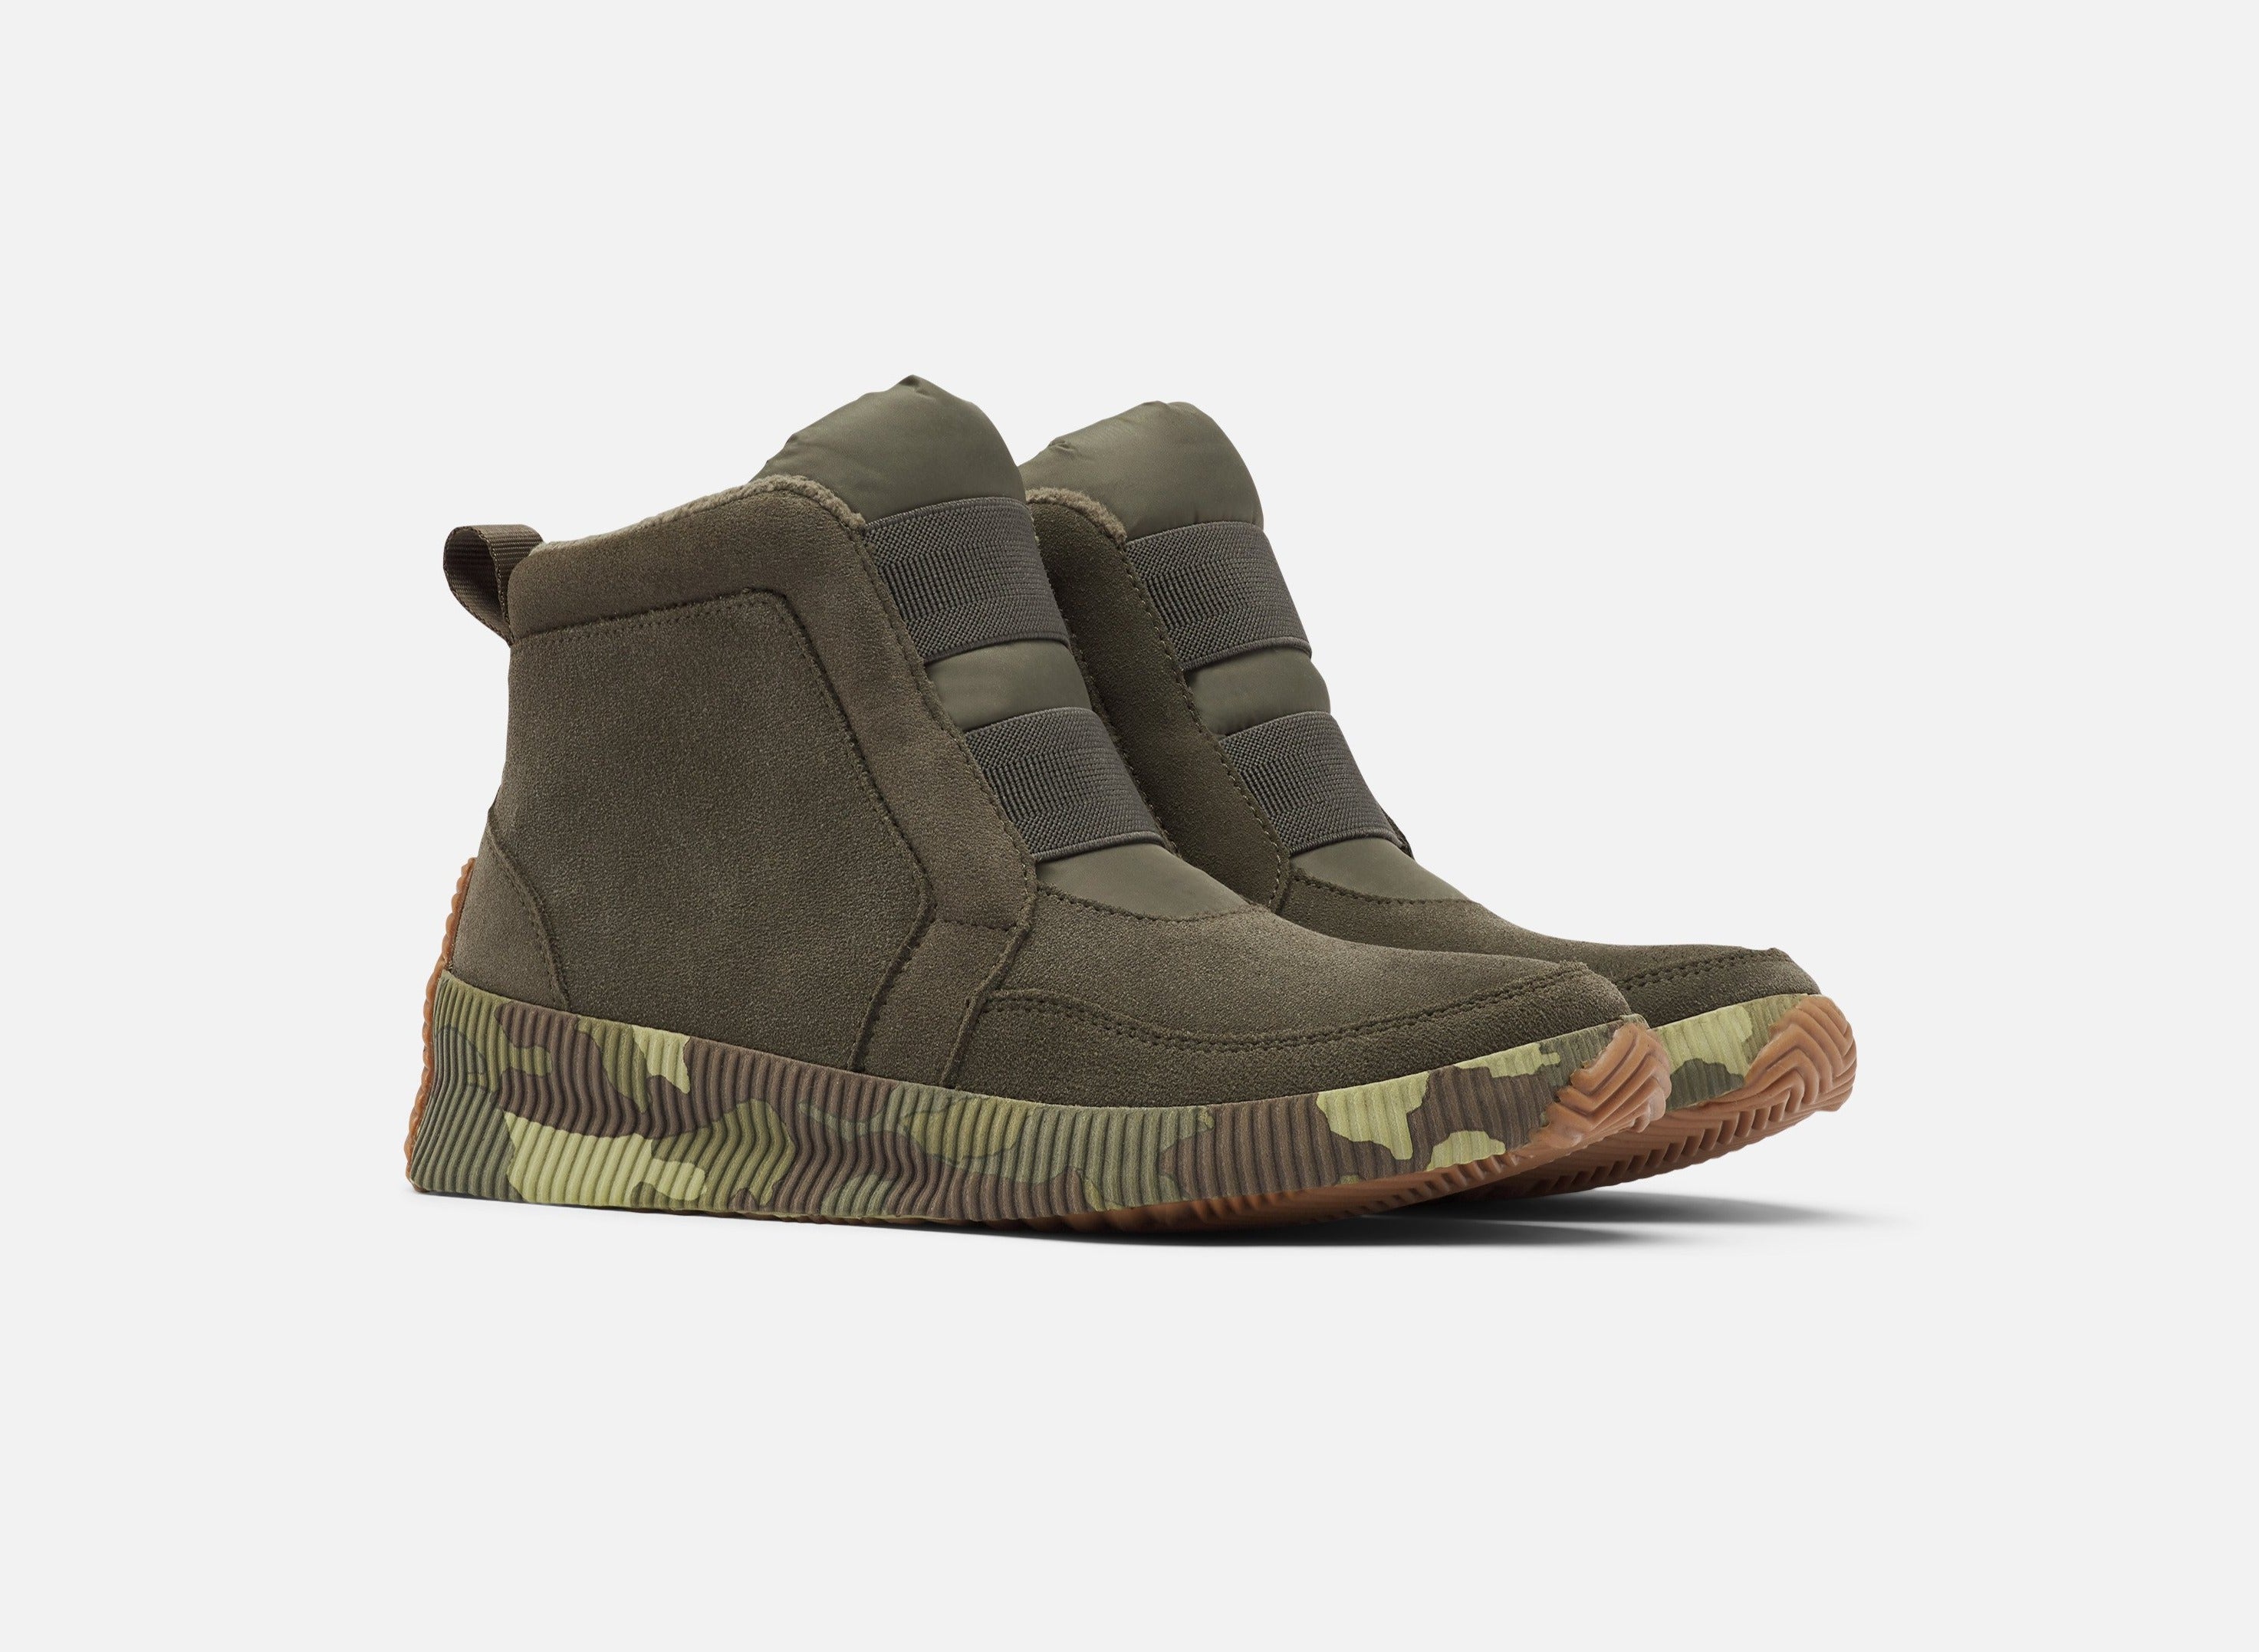 Out 'n About Plus Women's Mid Boot - Alpine Tundra, Green Camo